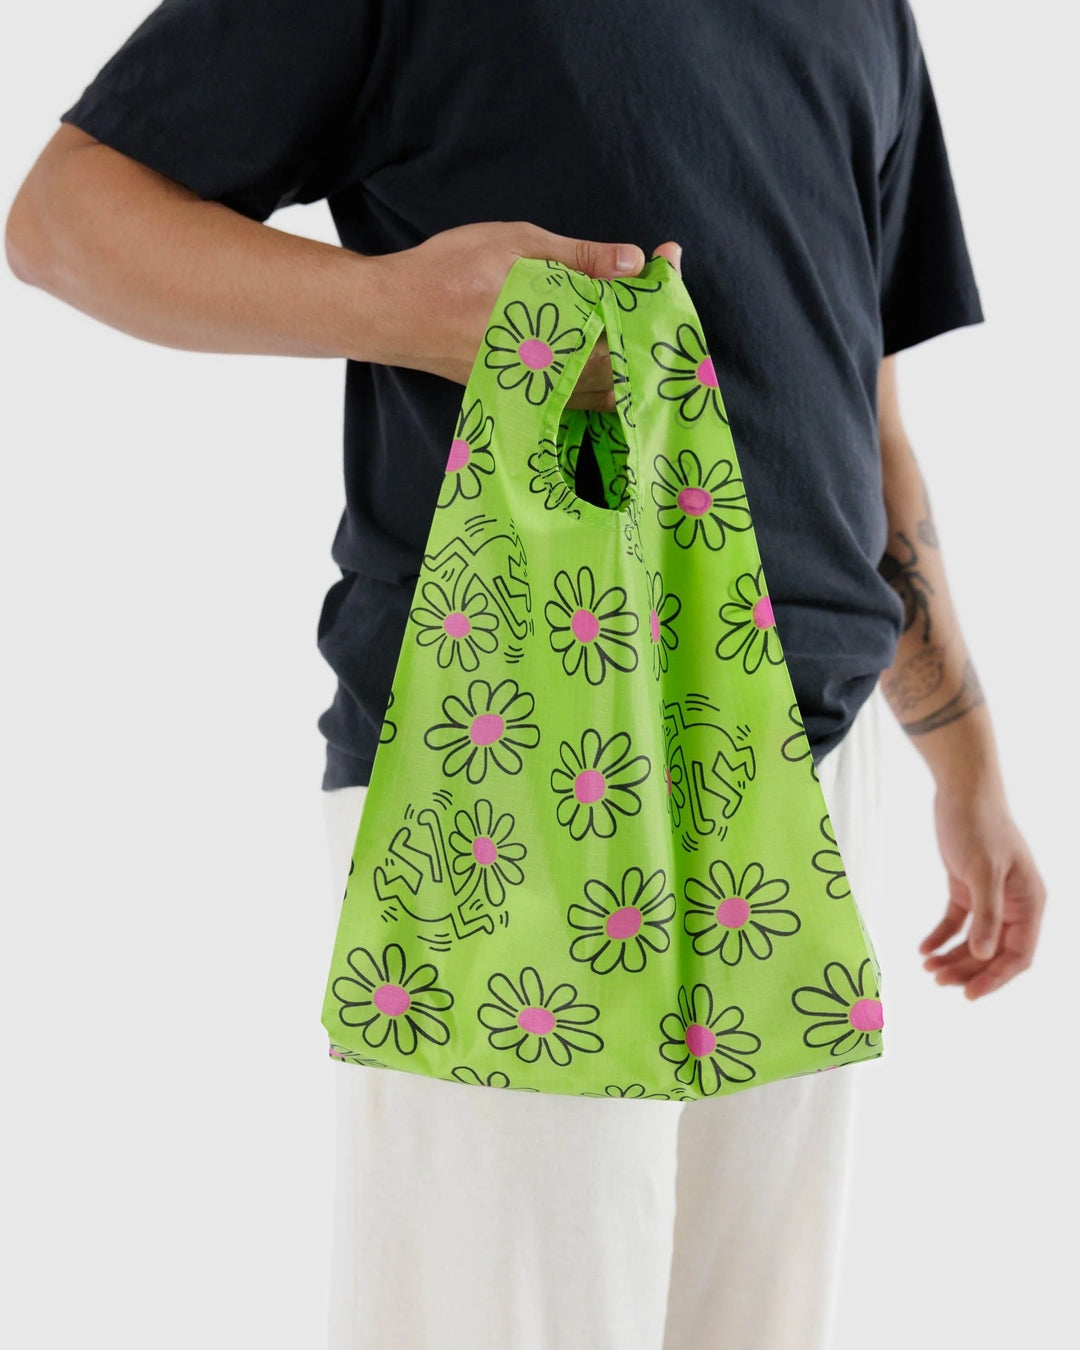 Baby Reusable Bag - Keith Haring Flower [PRE ORDER]